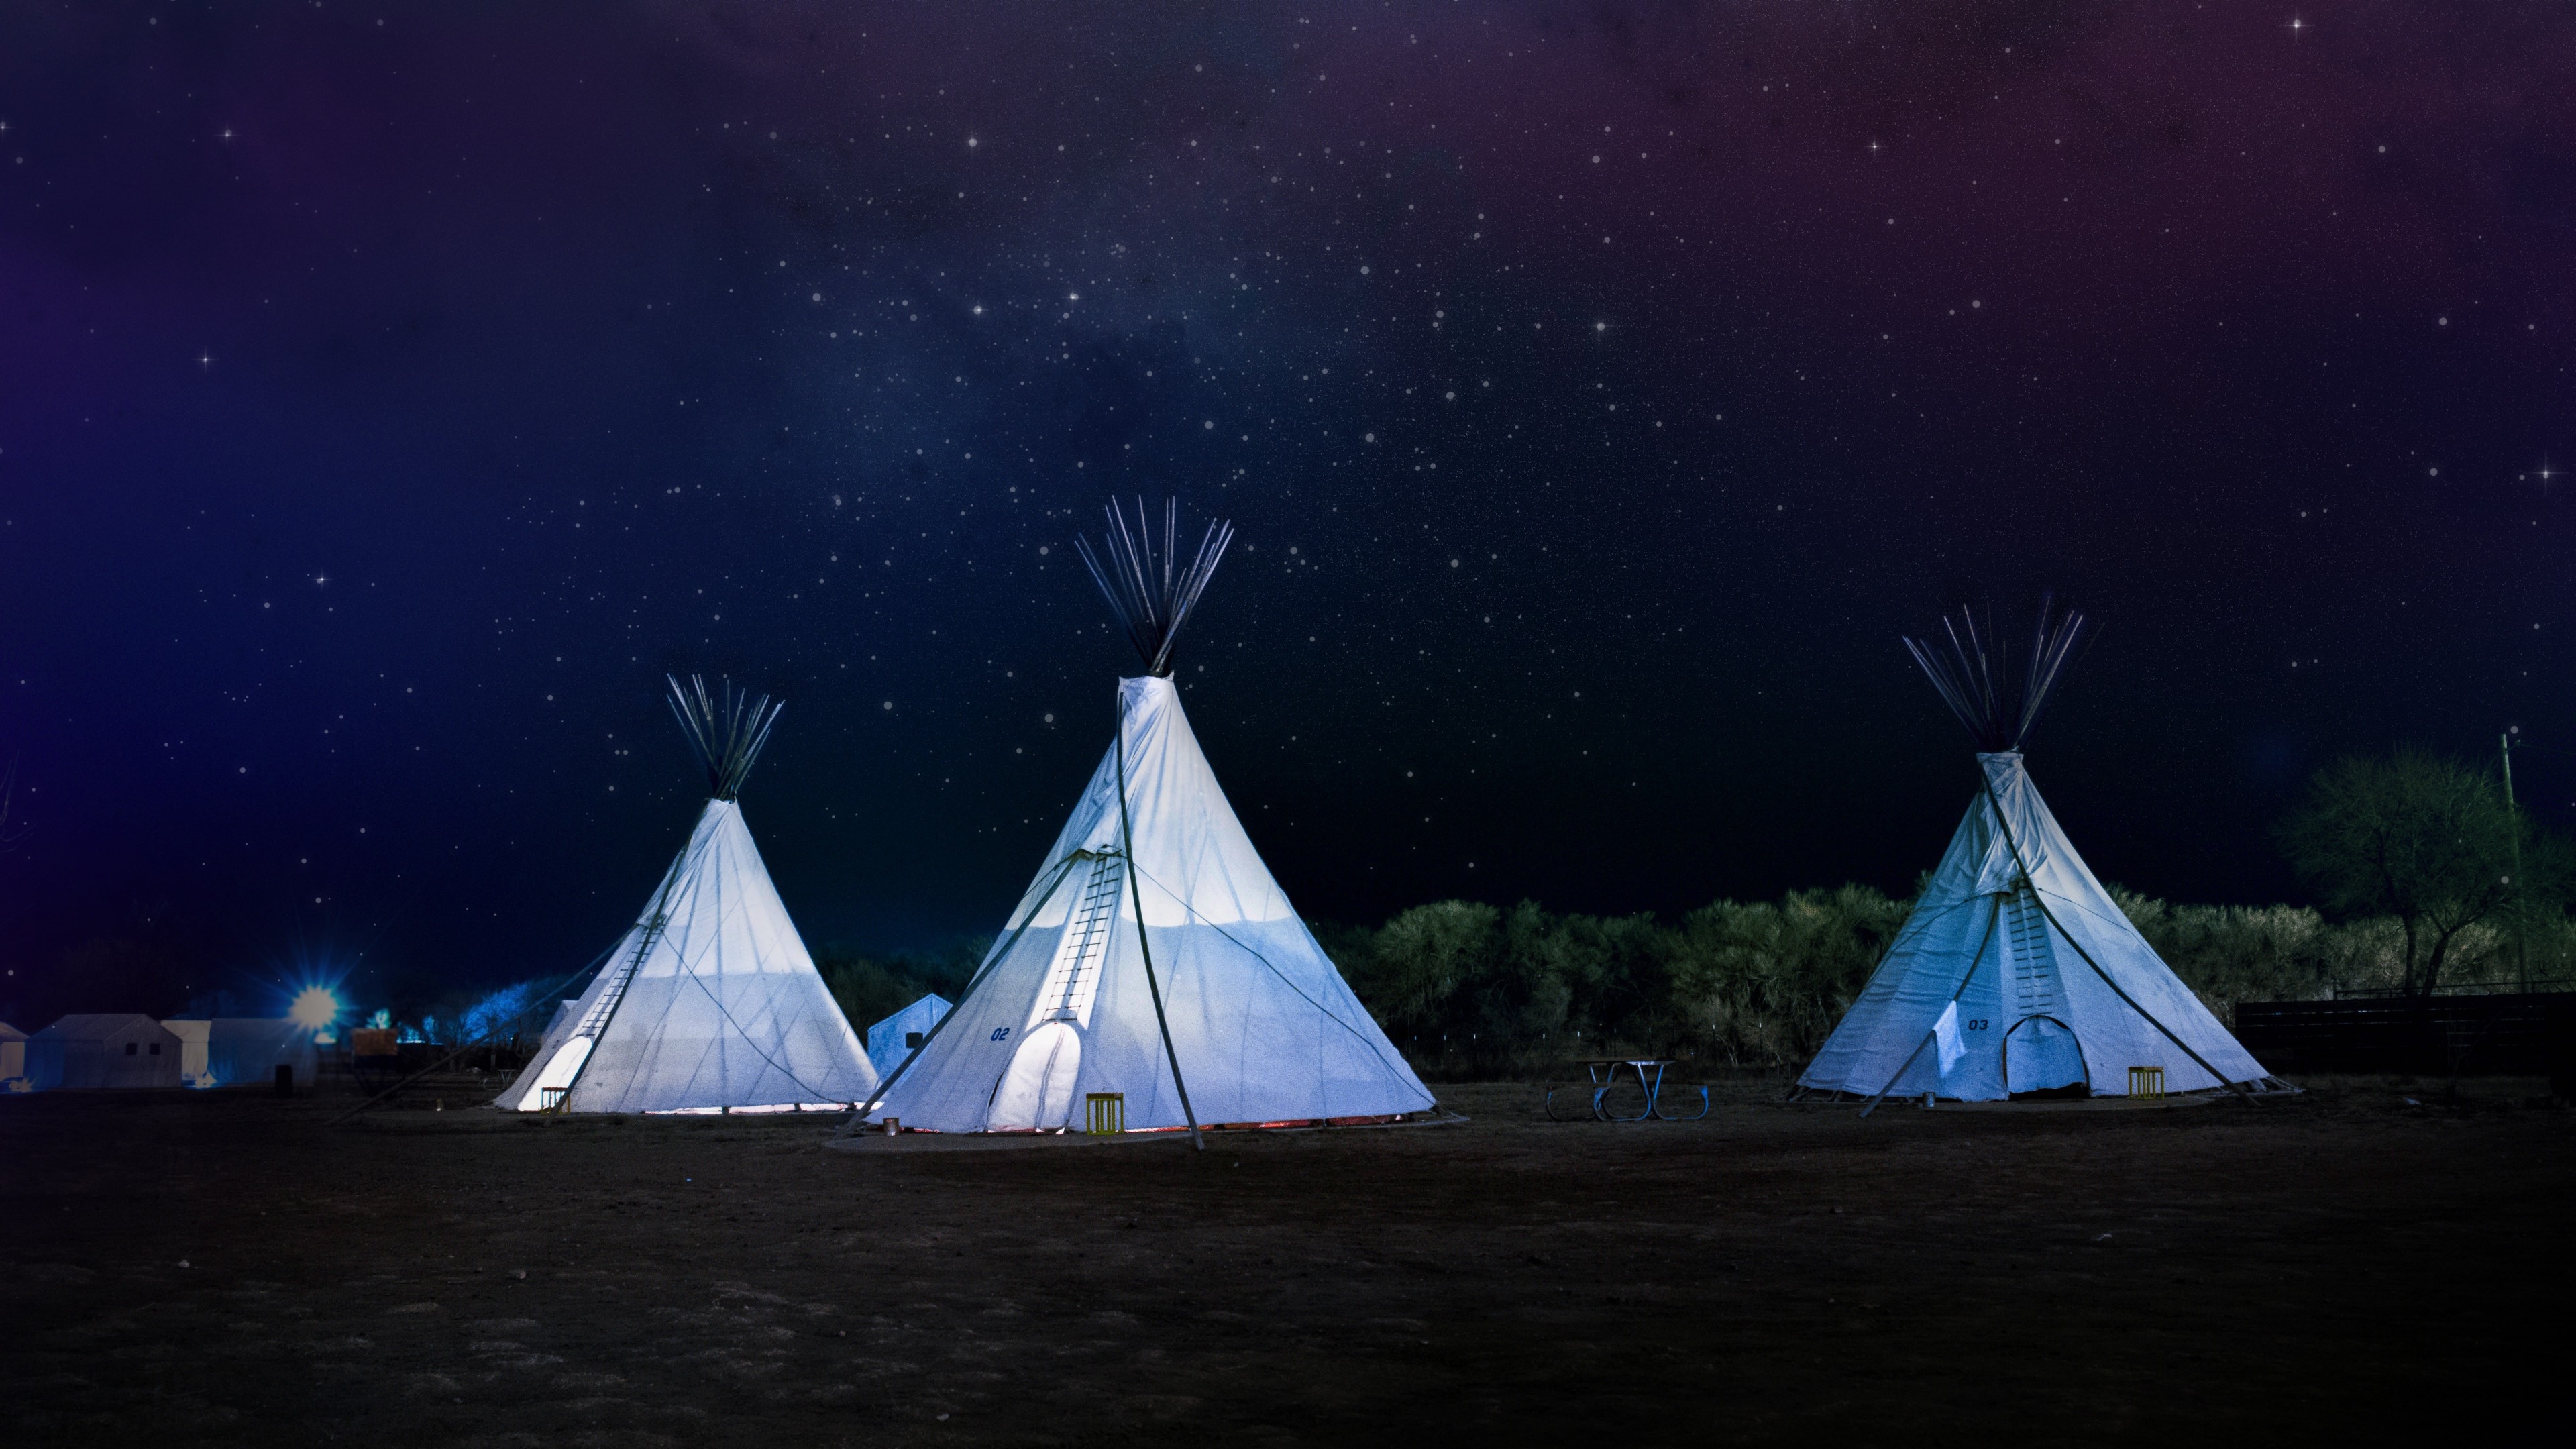 nature, Landscape, Architecture, Trees, Building, Tepee, Night, Stars, Forest, Lights, Tent, Bench Wallpaper